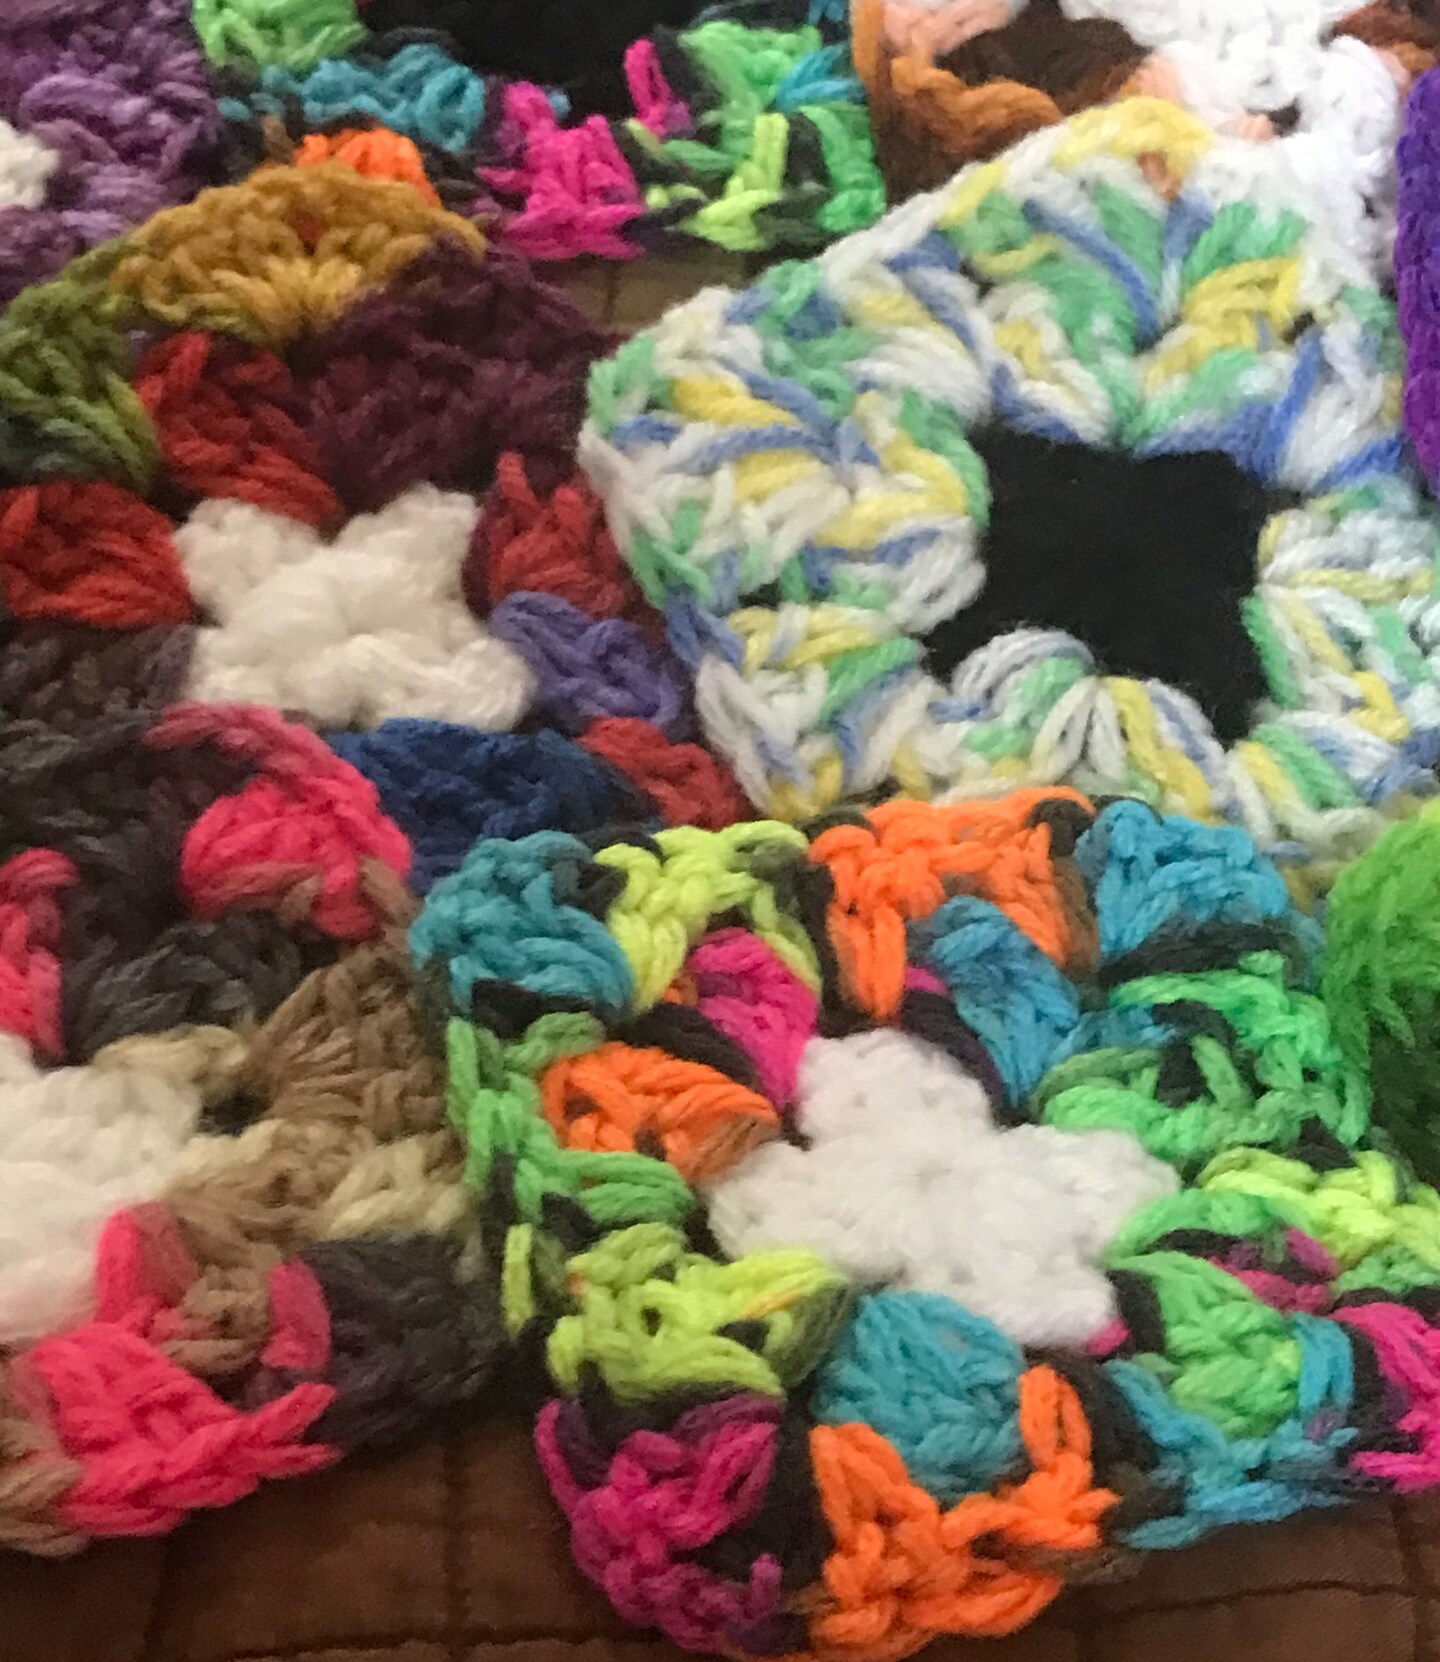 Granny Square Yarn Lot 9 Skeins Solid Colors 1 lb 2 oz total Weight  Assorted